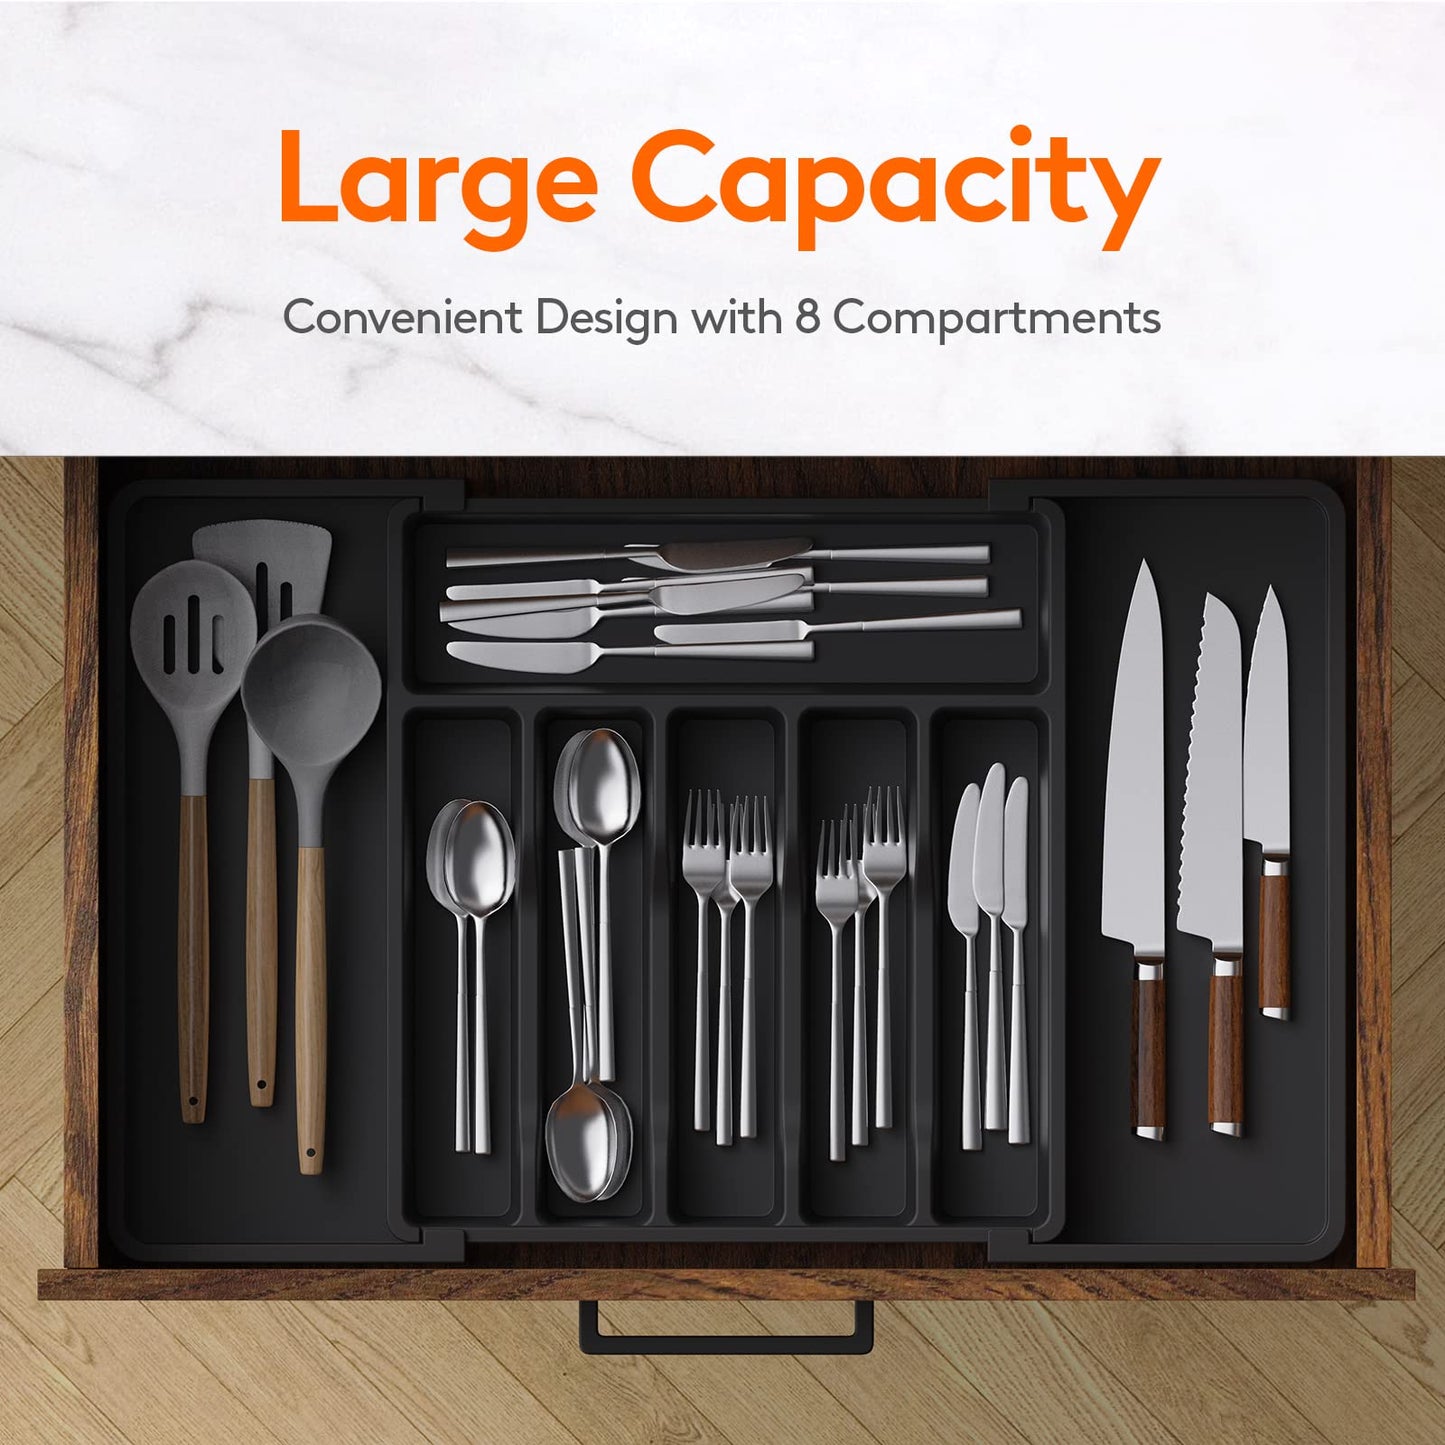 Lifewit Cutlery Drawer Organiser, Expandable Utensil Tray for Kitchen, Adjustable Silverware and Flatware Holder, Compact Plastic Storage for Spoons Forks Knives, Large, Black